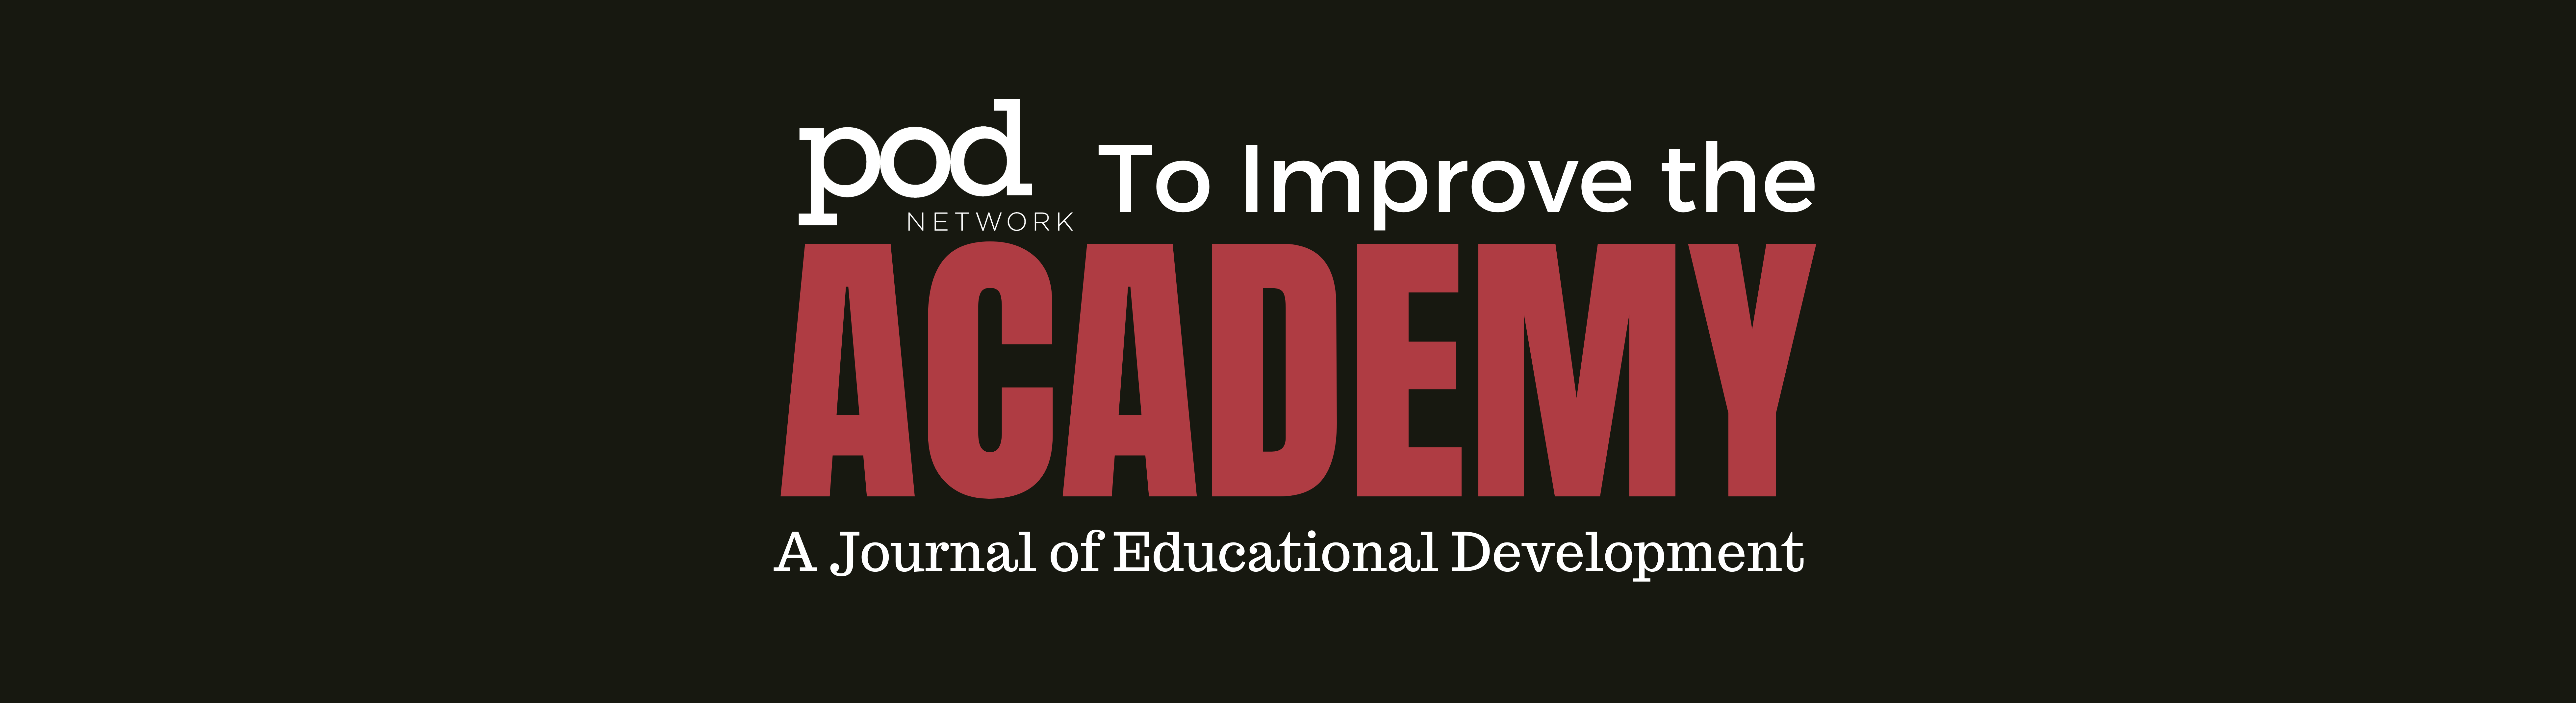 Correction notice for "Practical guidelines for development of a university-wide faculty mentorship program using a multimodal mentoring network model" by Matthew G. Schwartz (To Improve the Academy, 2023, Vol. 42, No. 1)